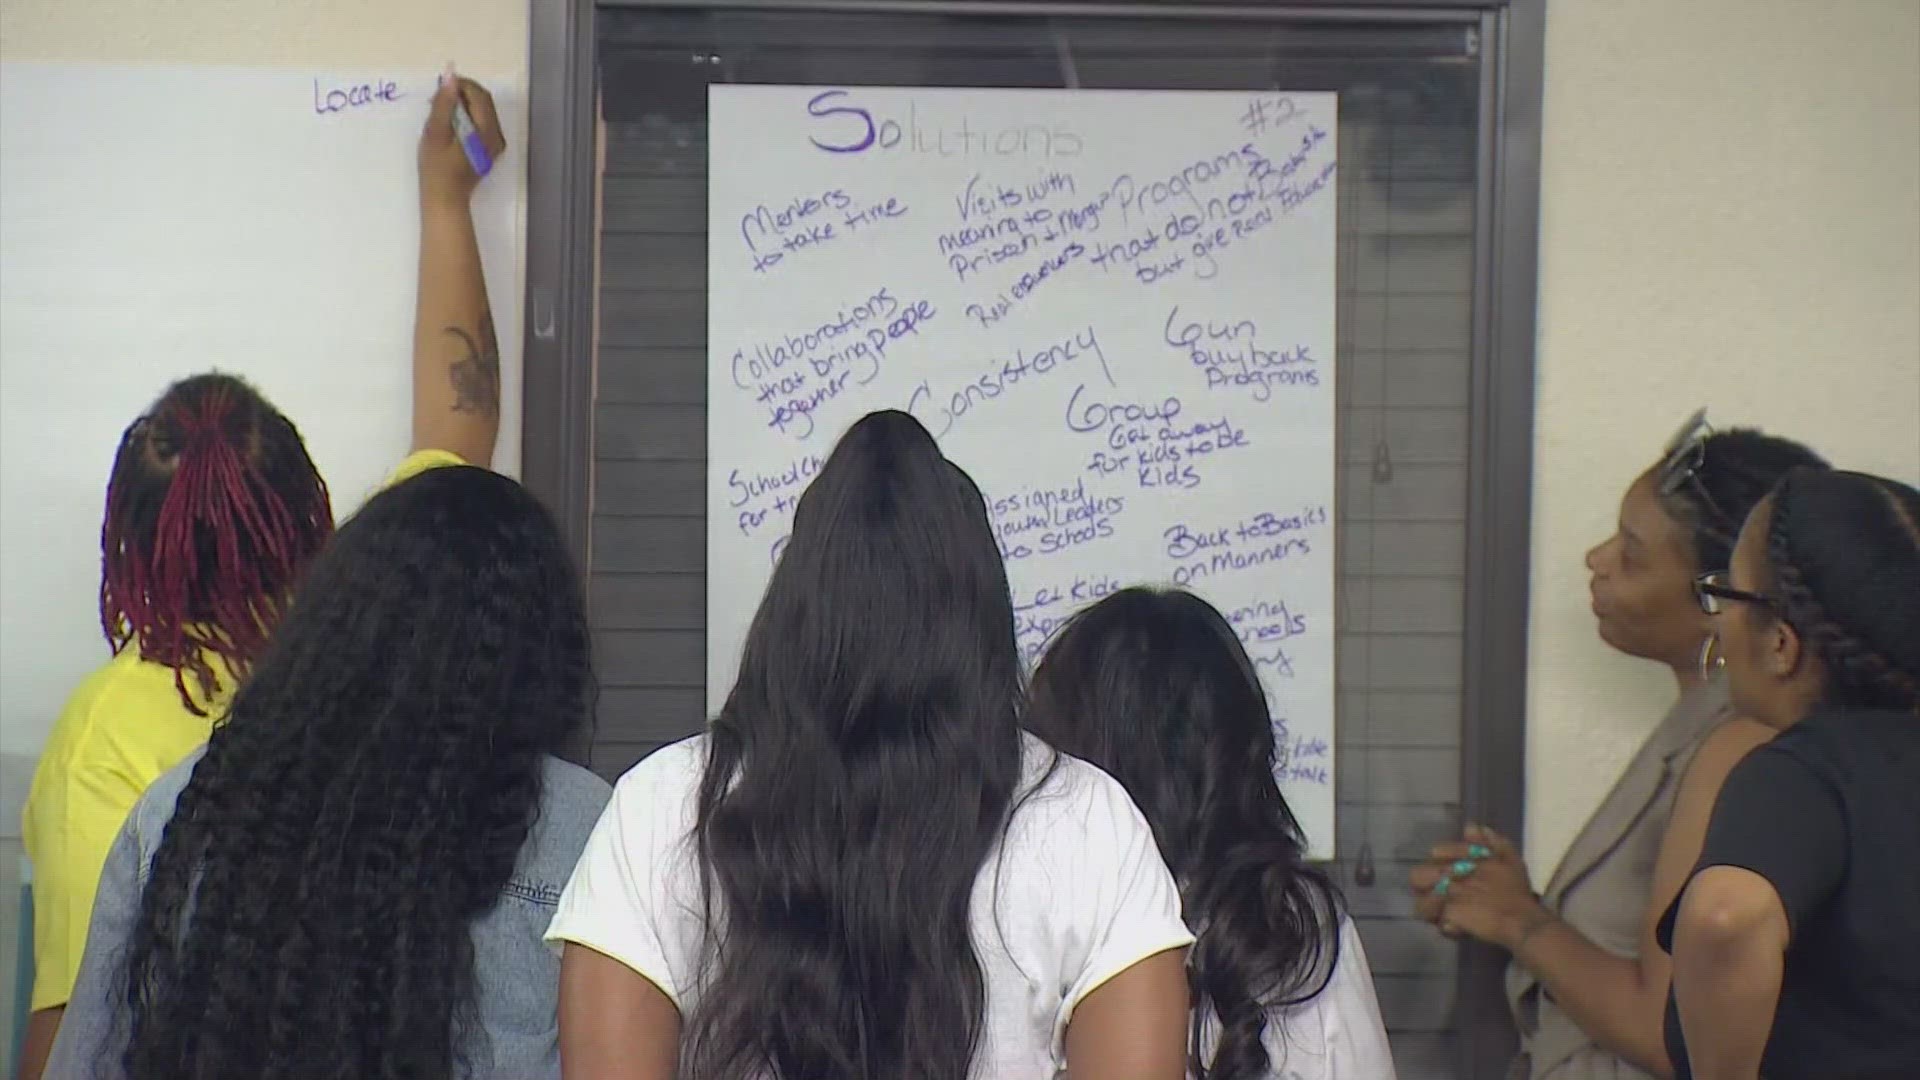 Community leaders around Dallas are looking for ways to avoid crimes among youth as the summer break approaches.